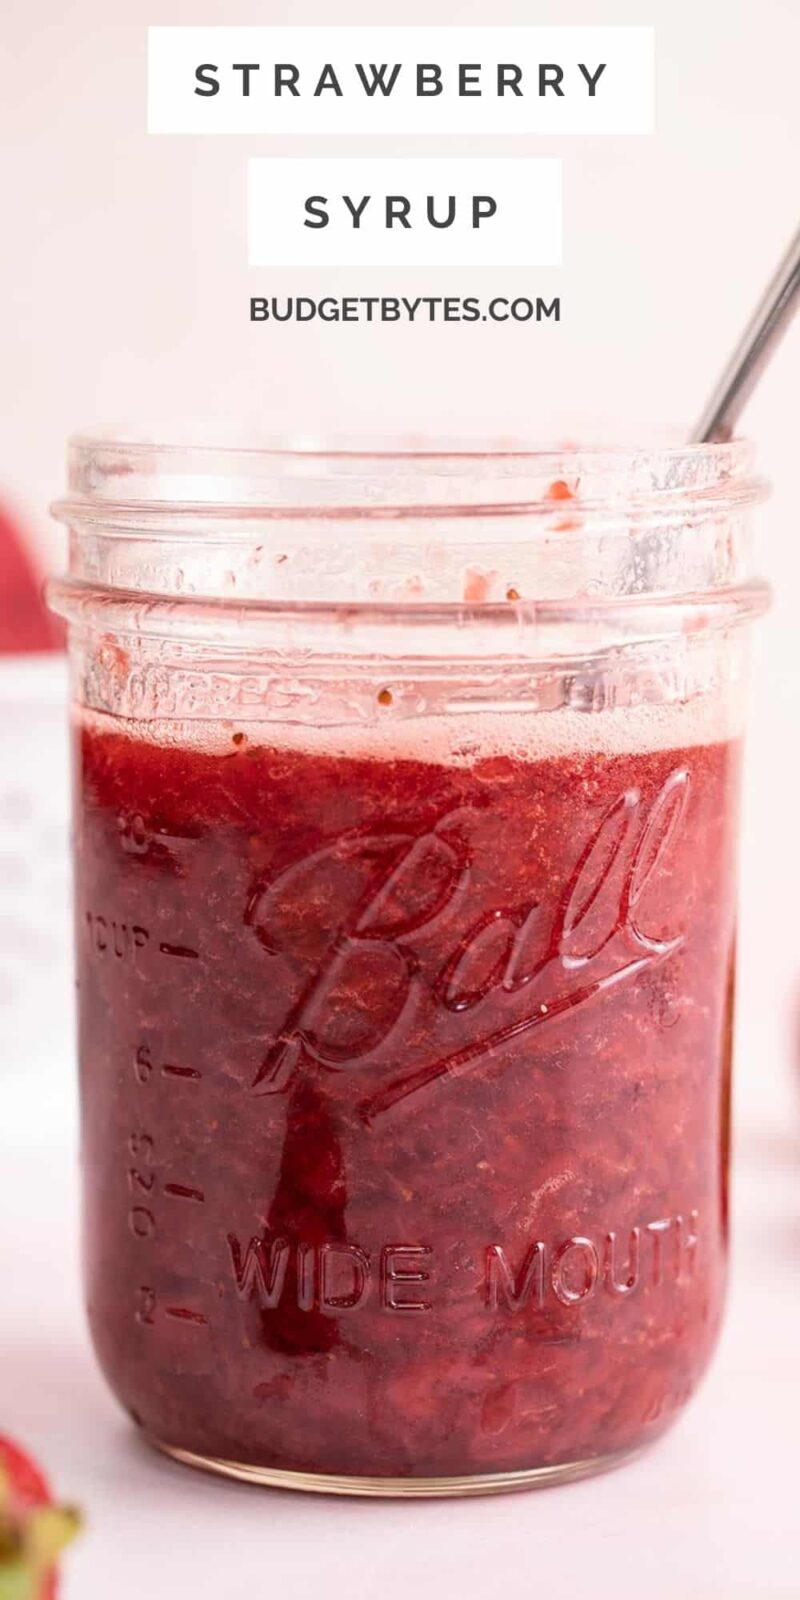 Side view of a jar of strawberry syrup with a spoon.